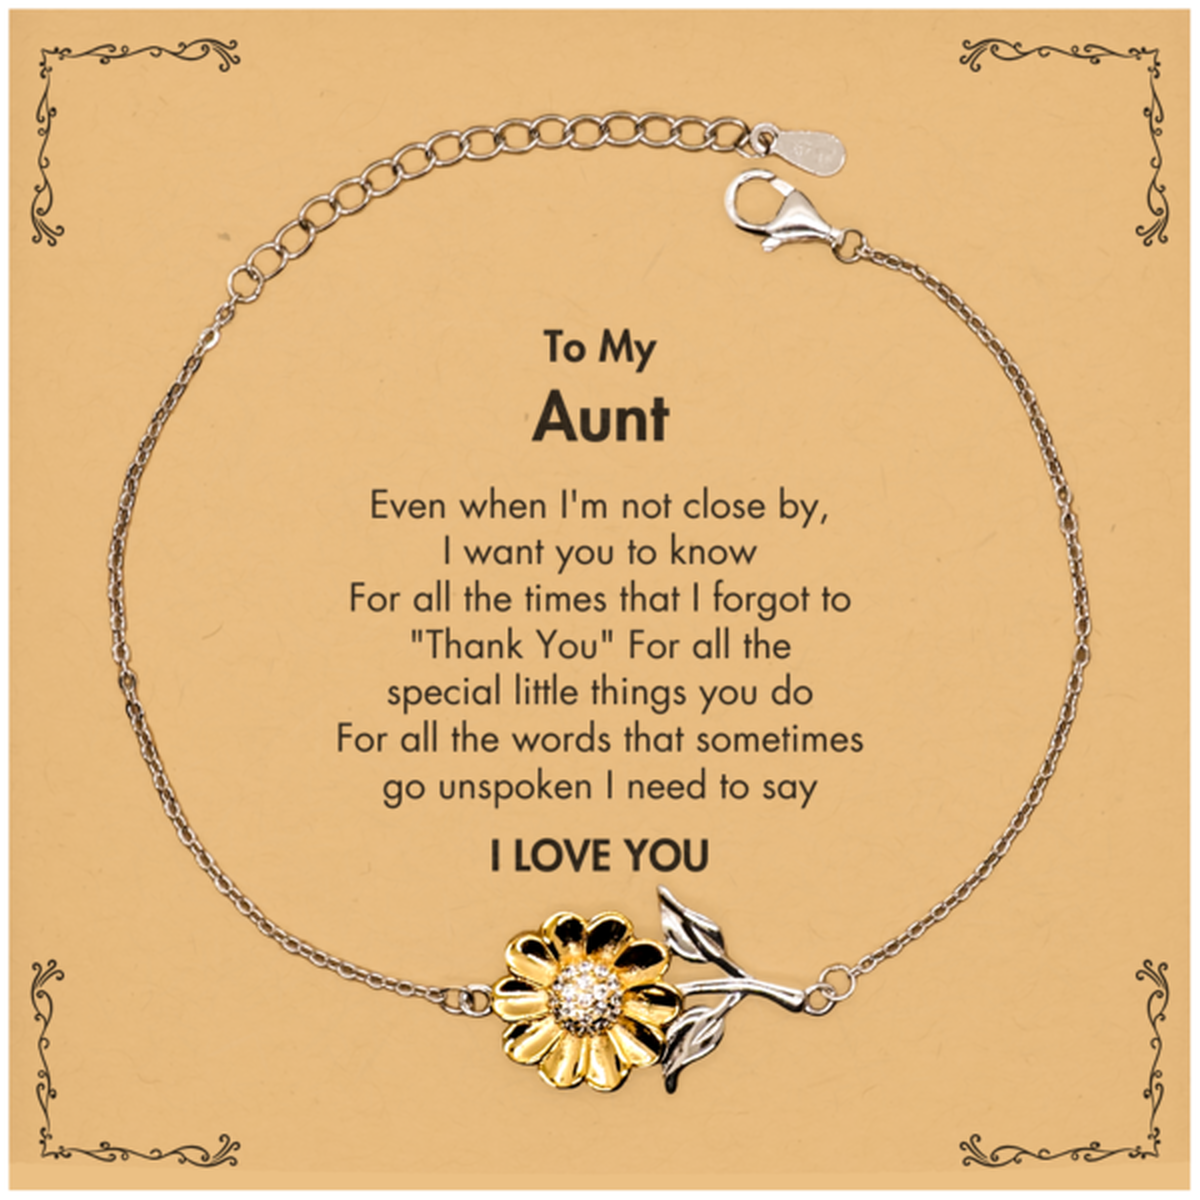 Thank You Gifts for Aunt, Keepsake Sunflower Bracelet Gifts for Aunt Birthday Mother's day Father's Day Aunt For all the words That sometimes go unspoken I need to say I LOVE YOU